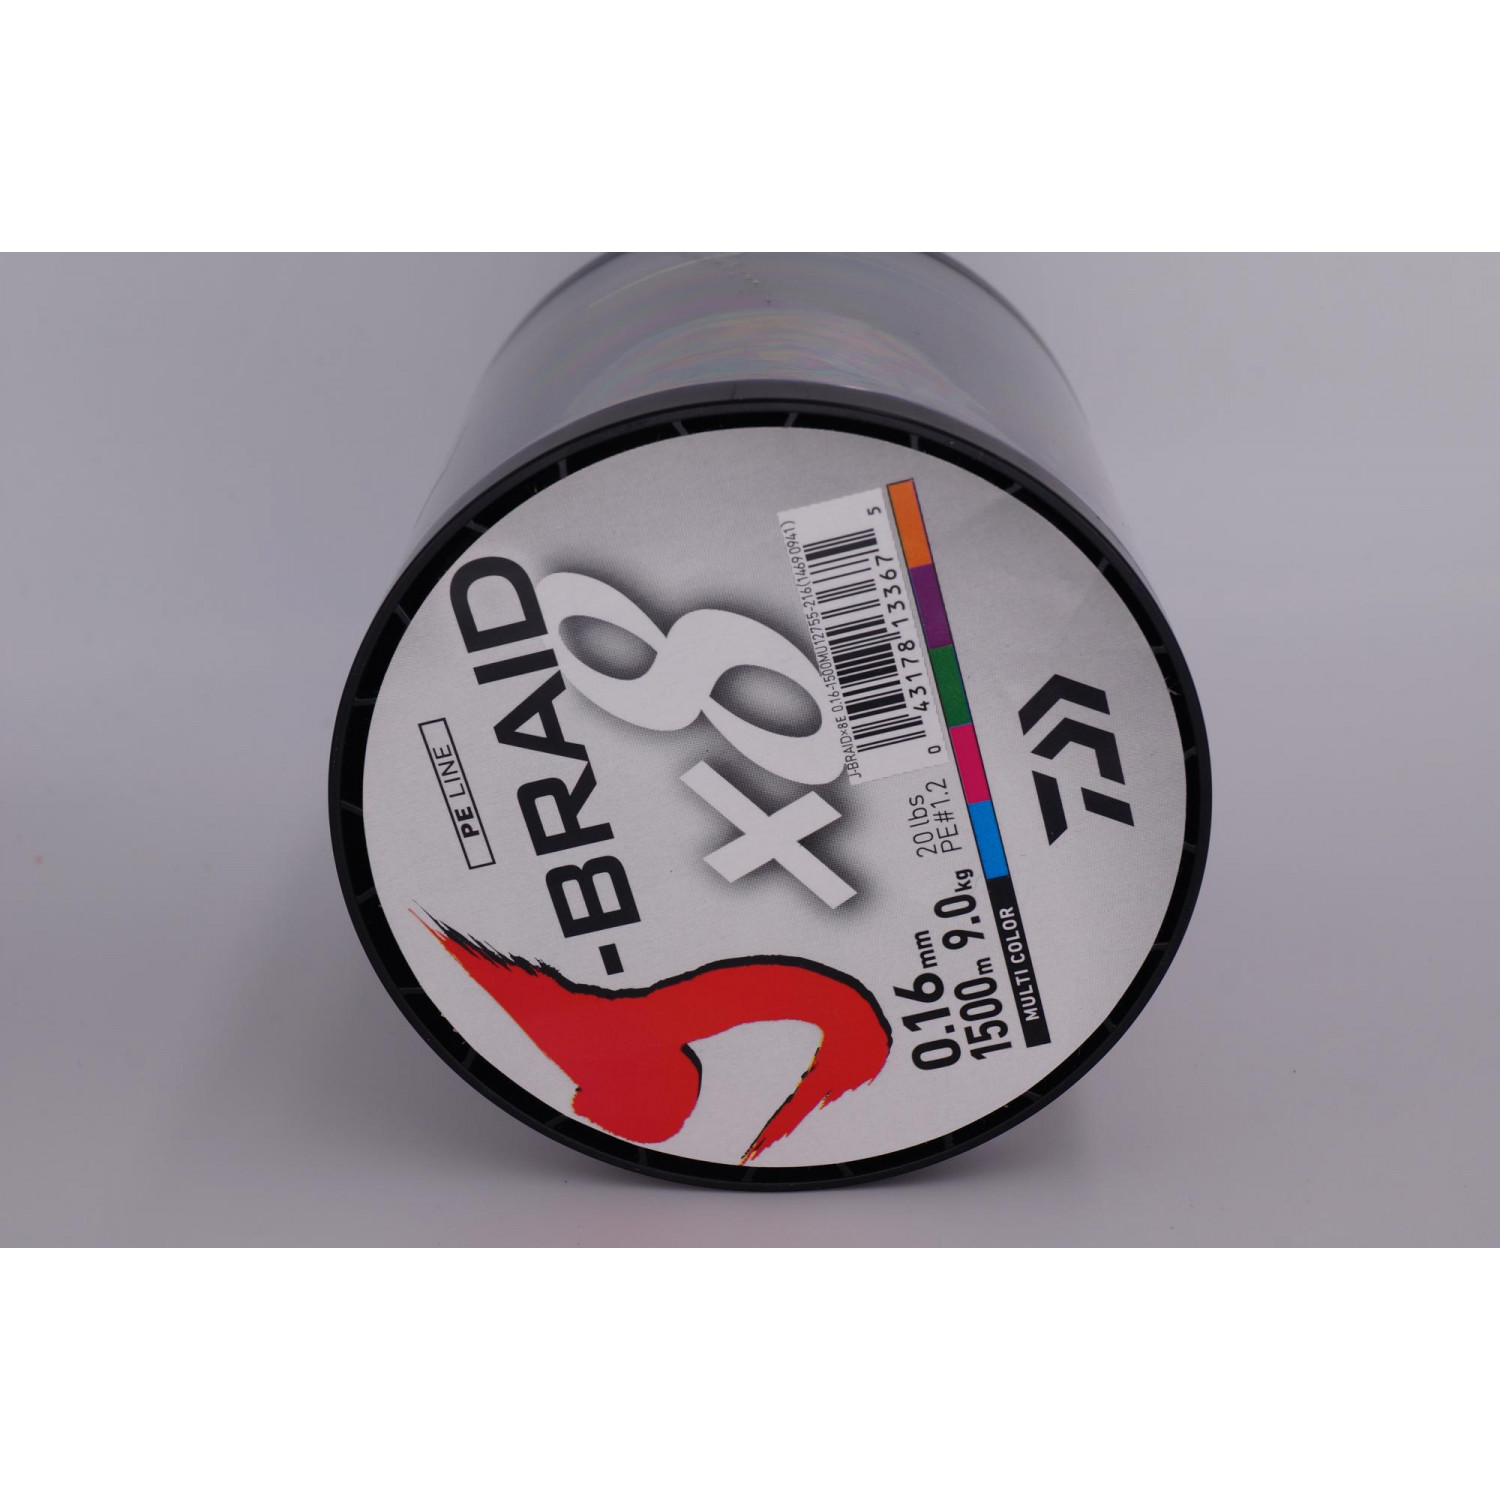 Daiwa J-Braid X8, multicolor, 0.16mm, 9.0kg / 20.0lbs, 1500m - round  braided line, traces of use, length unknown